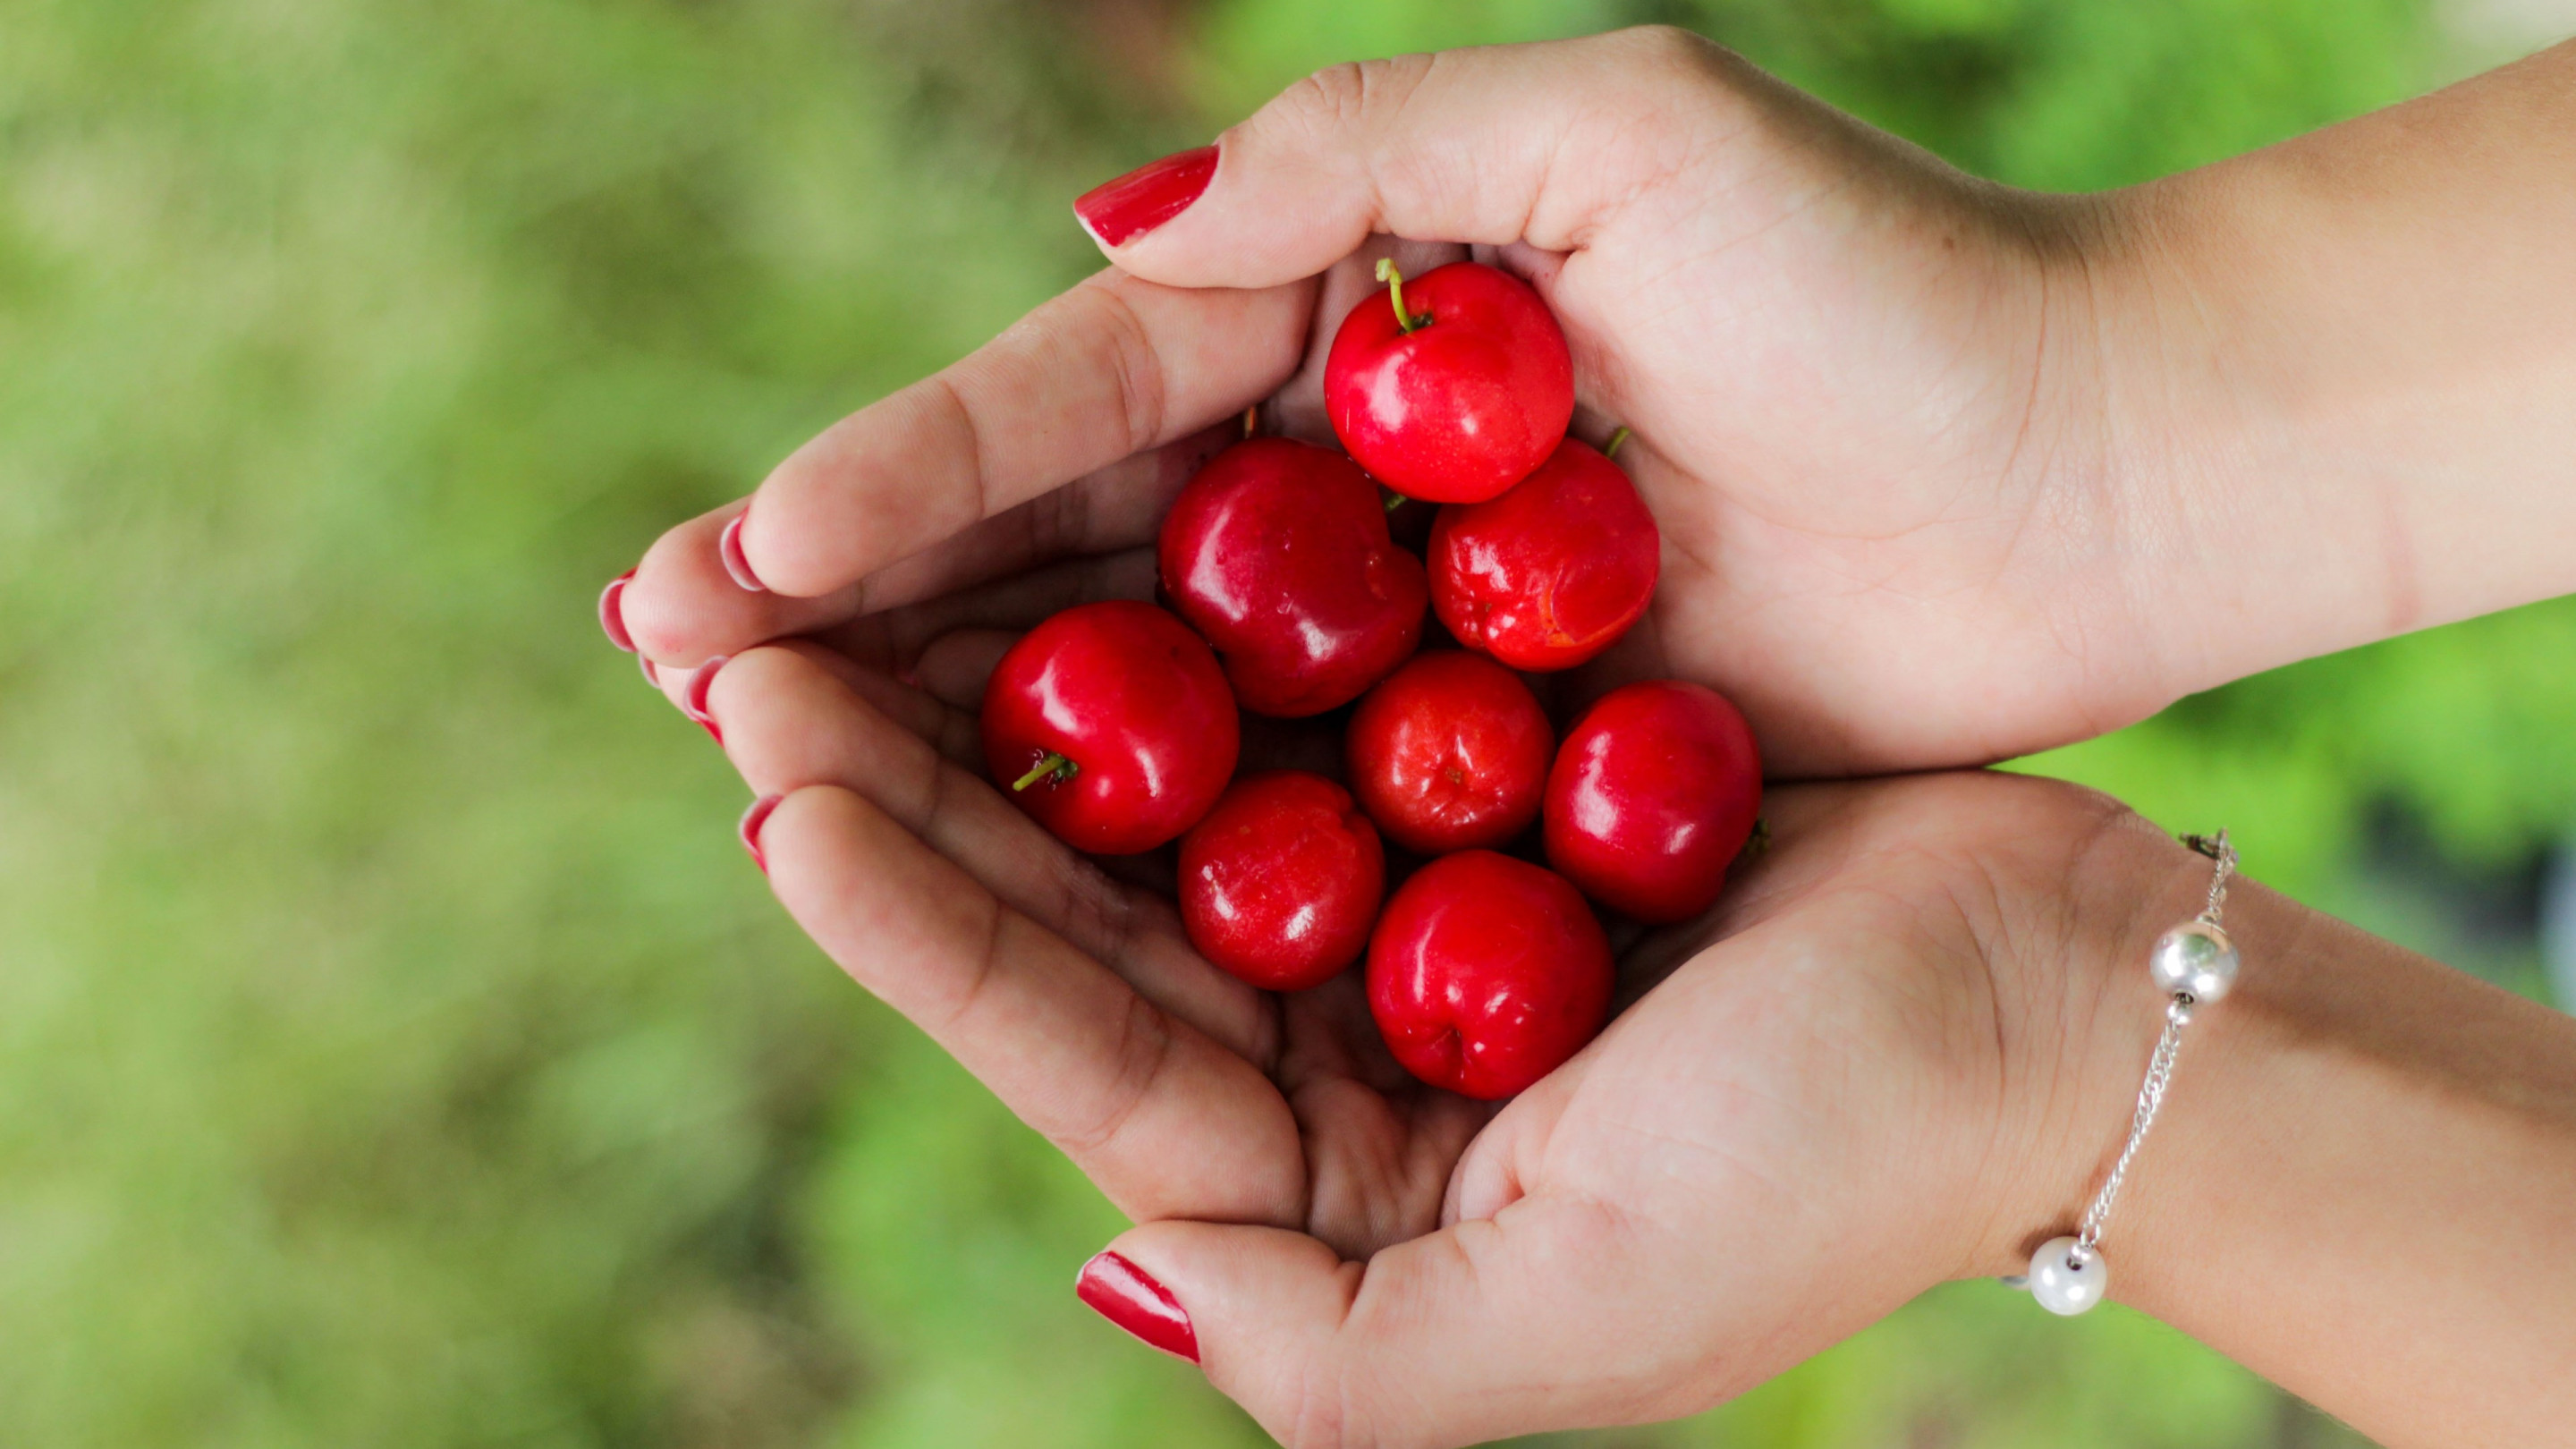 Hands filled with cherries wallpaper 2880x1620